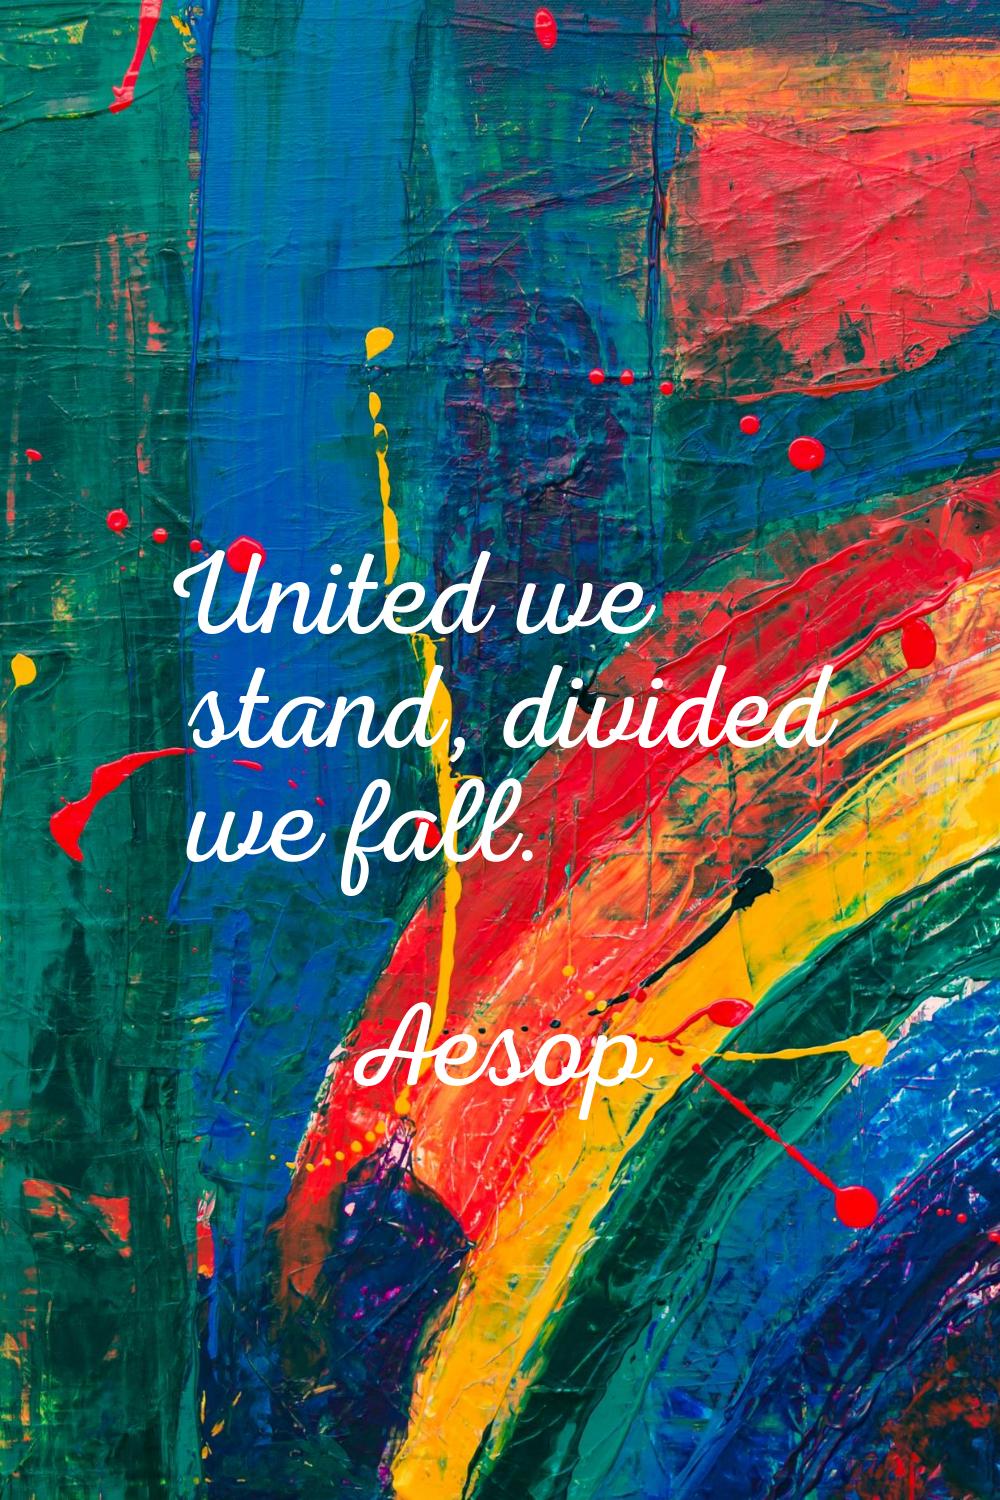 United we stand, divided we fall.